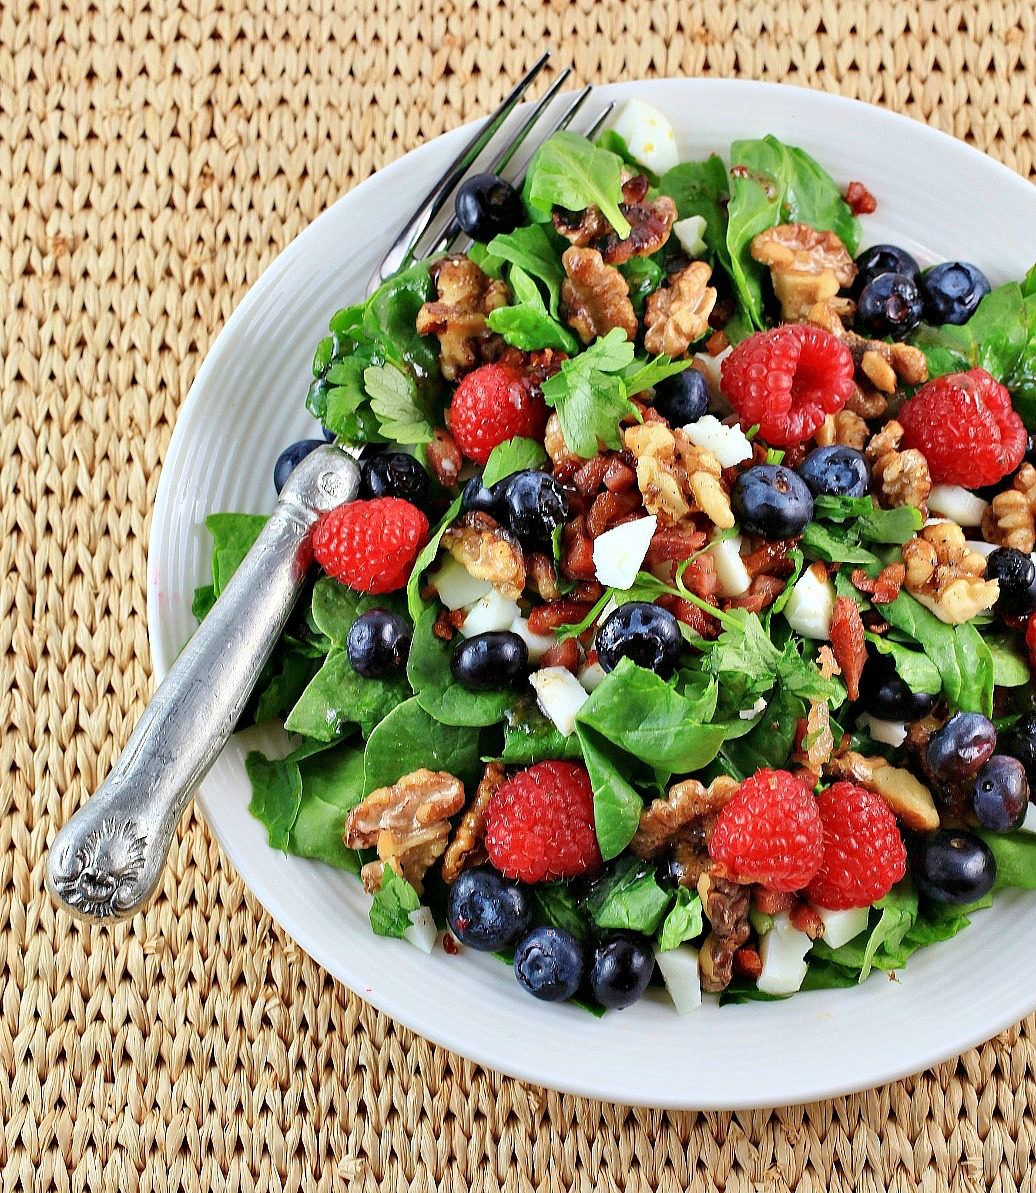 Rattlebridge Farm: Spinach Salad with Berries and a Warm Pancetta Dressing